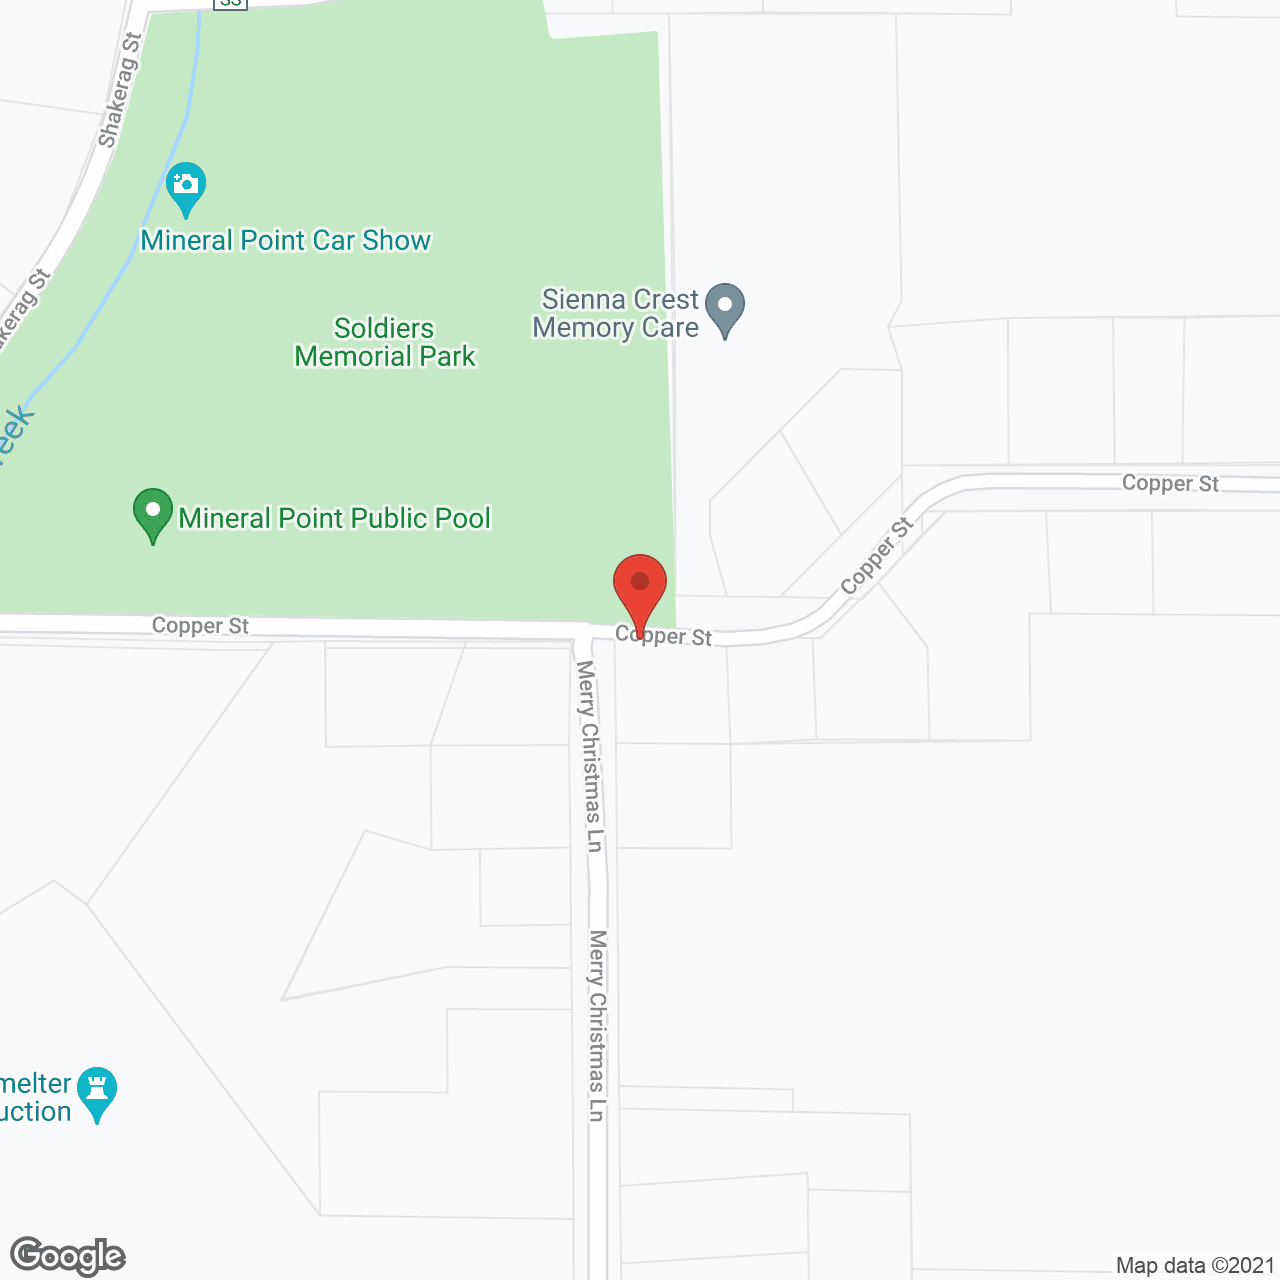 Sienna Crest Memory Care in google map